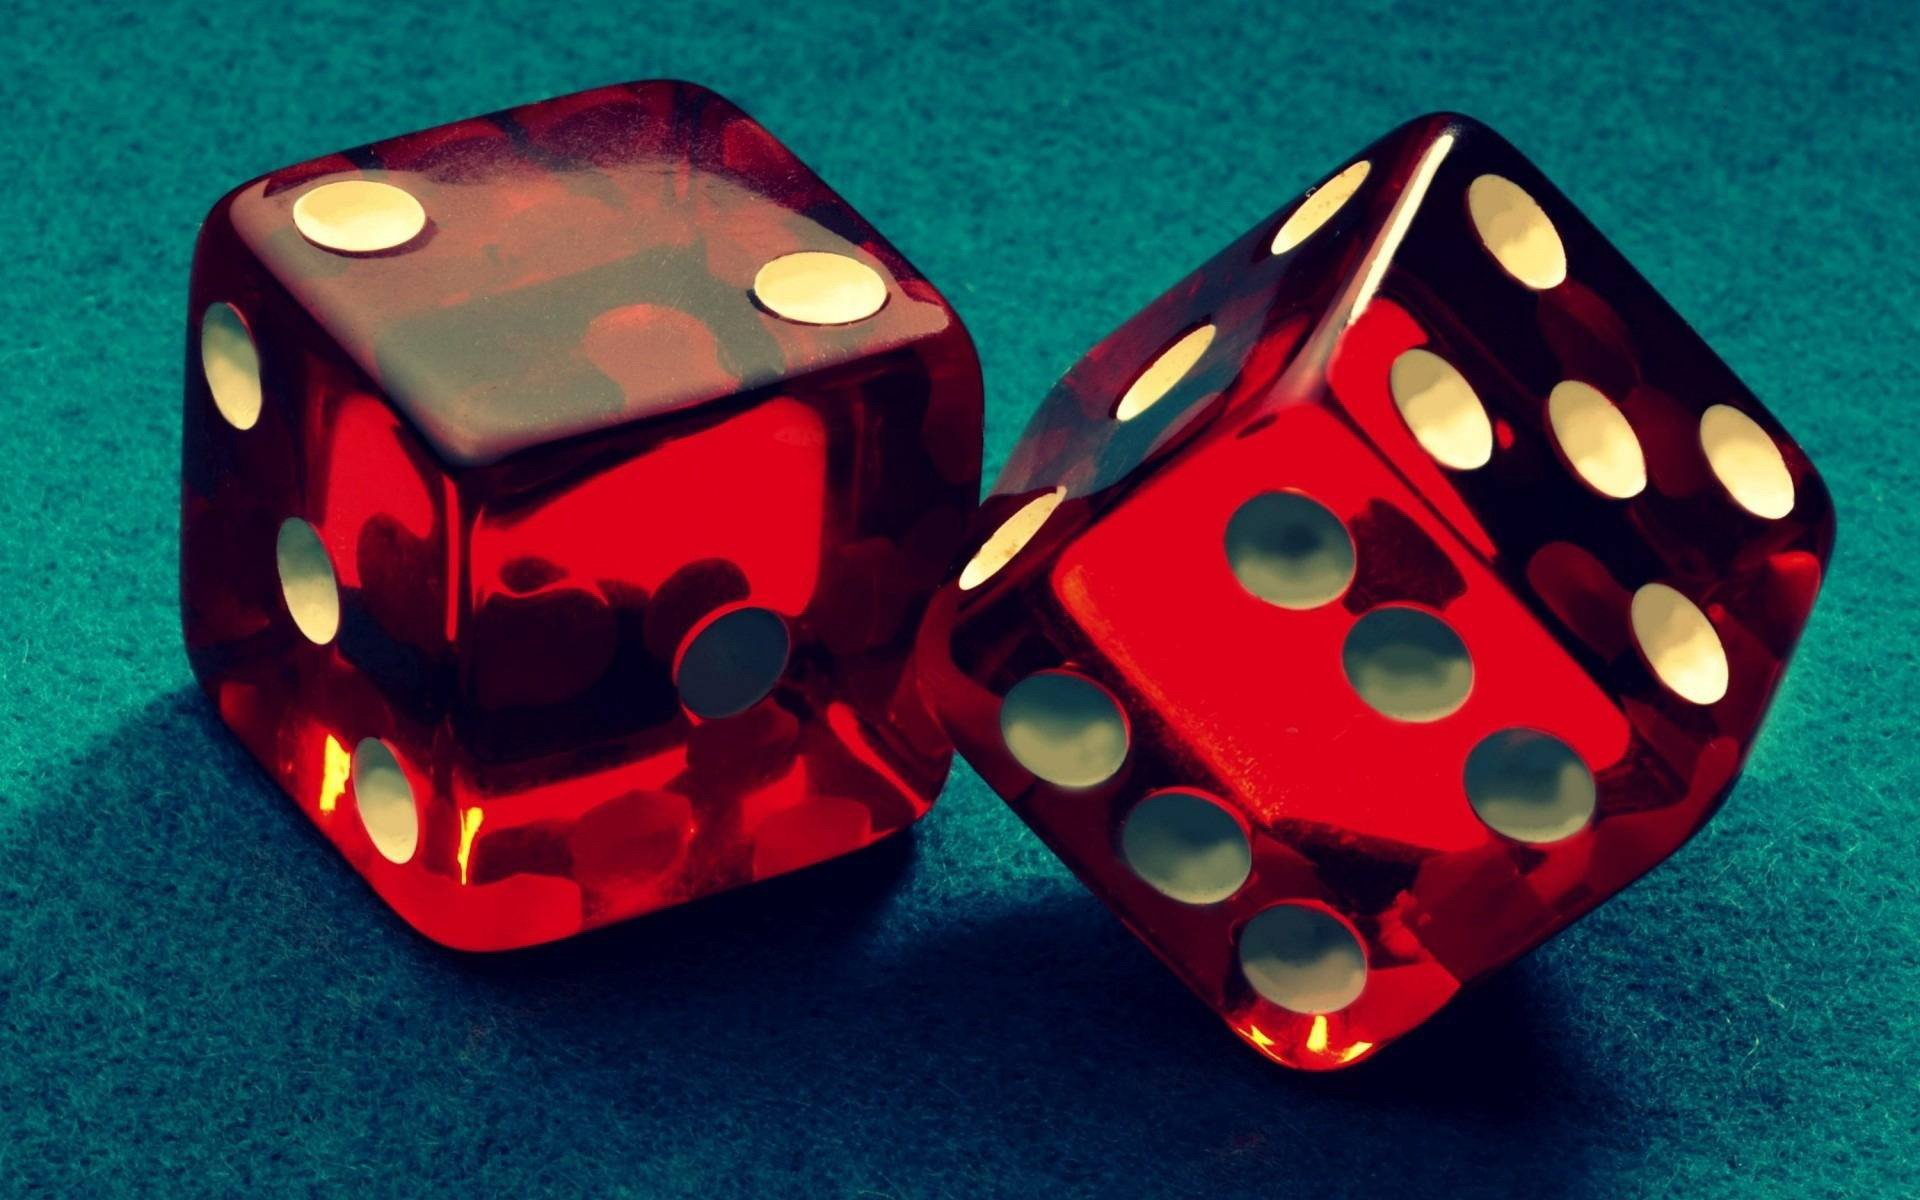 dice wallpaper,games,dice game,dice,red,indoor games and sports